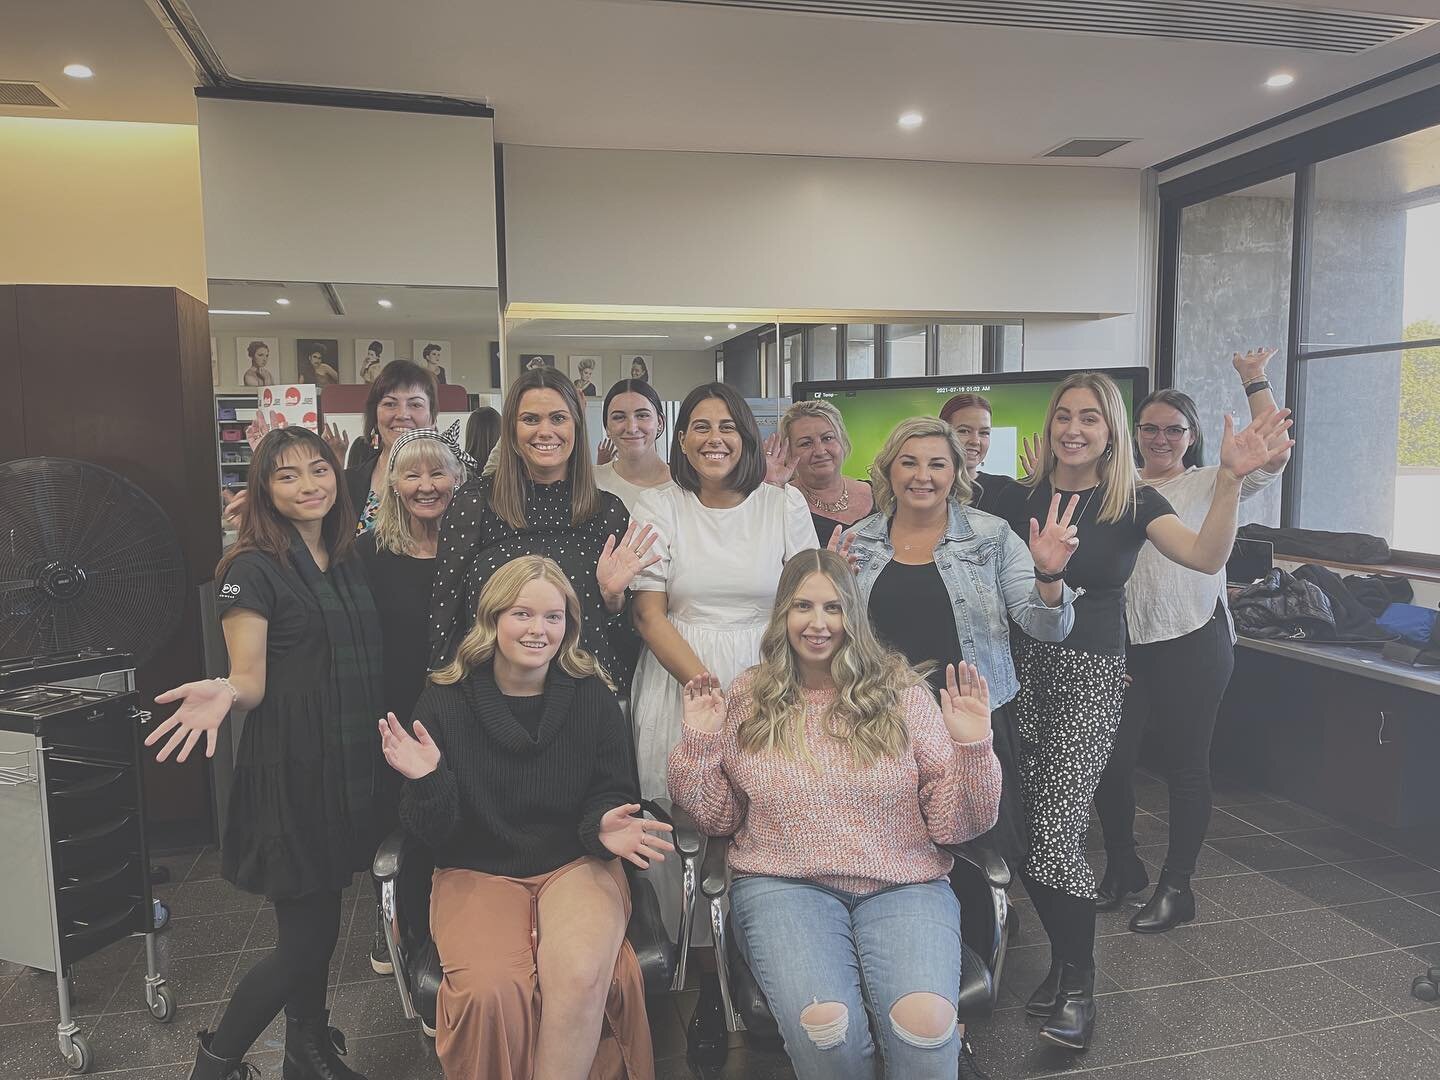 What a fun day! On Monday I had the pleasure of putting on my @nakhair hat and working with some wonderful hairdressers in Toowoomba! A day full of hair education fills my cup! 😍🙌🏻 

#thornlands #carindale #wellingtonpoint #ormiston #wynnummanly #